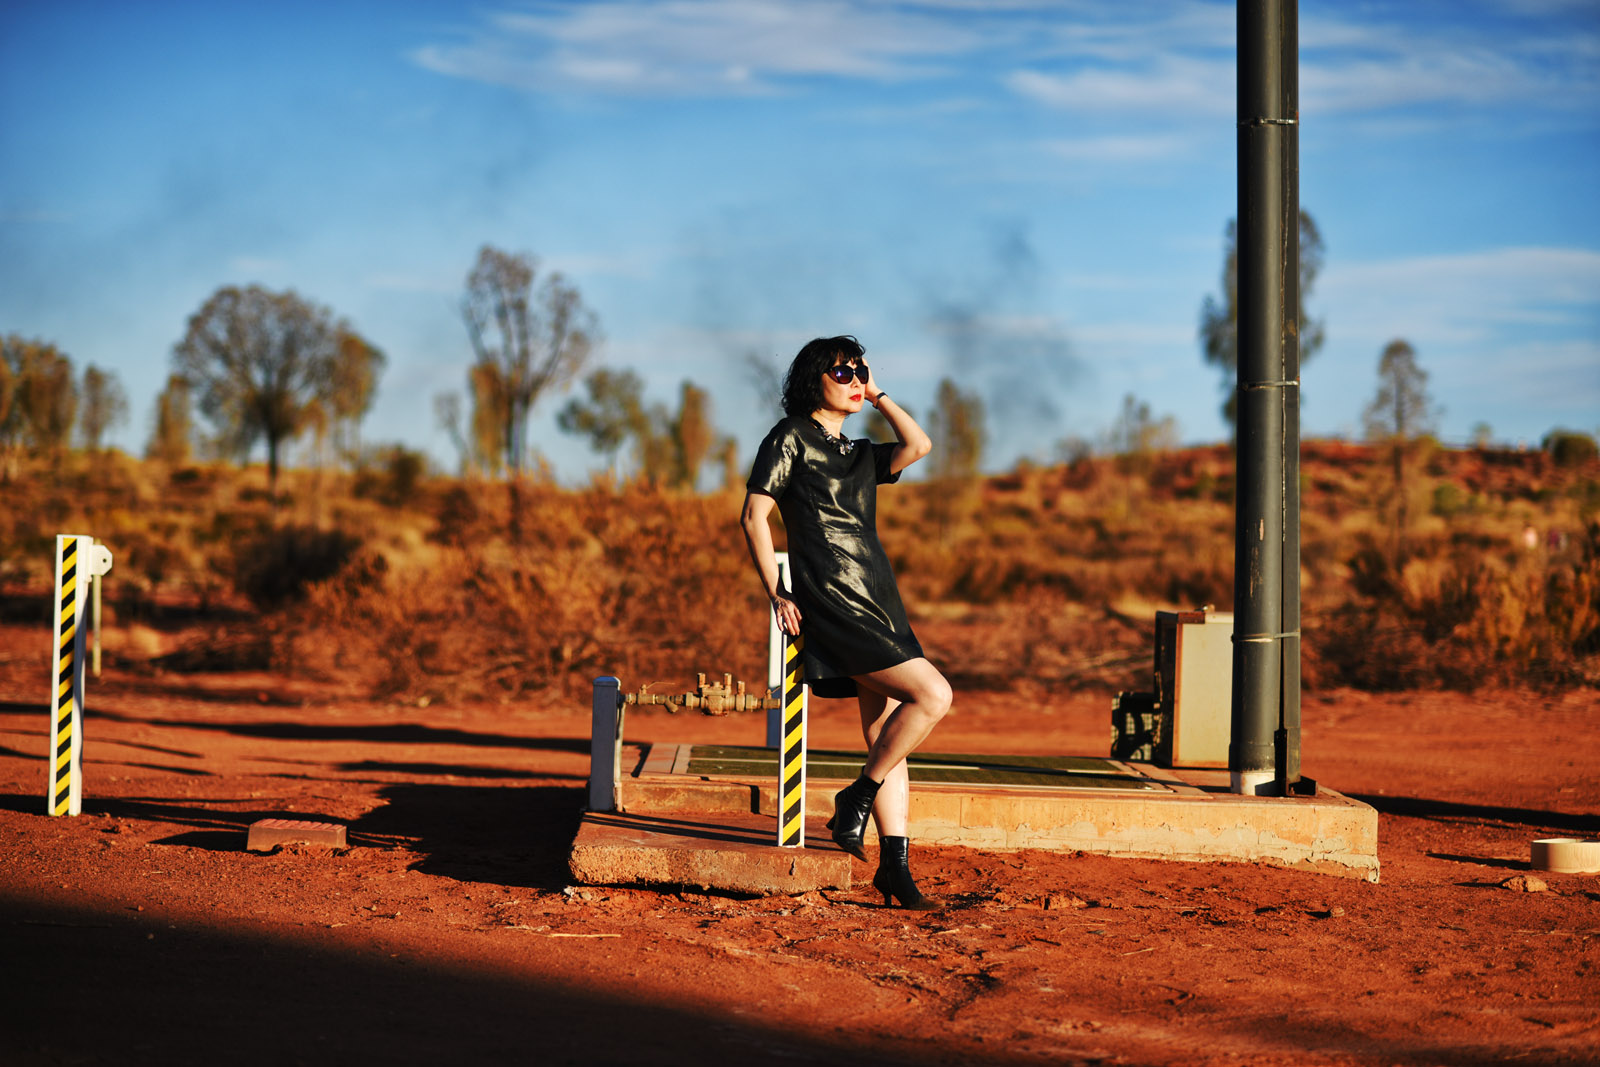 Red soil in the Central Australian outback Uluru, Vivienne in metalic dress at a small pumping station in the desert. Photoshoot by Kent Johnson for White Caviar Life.